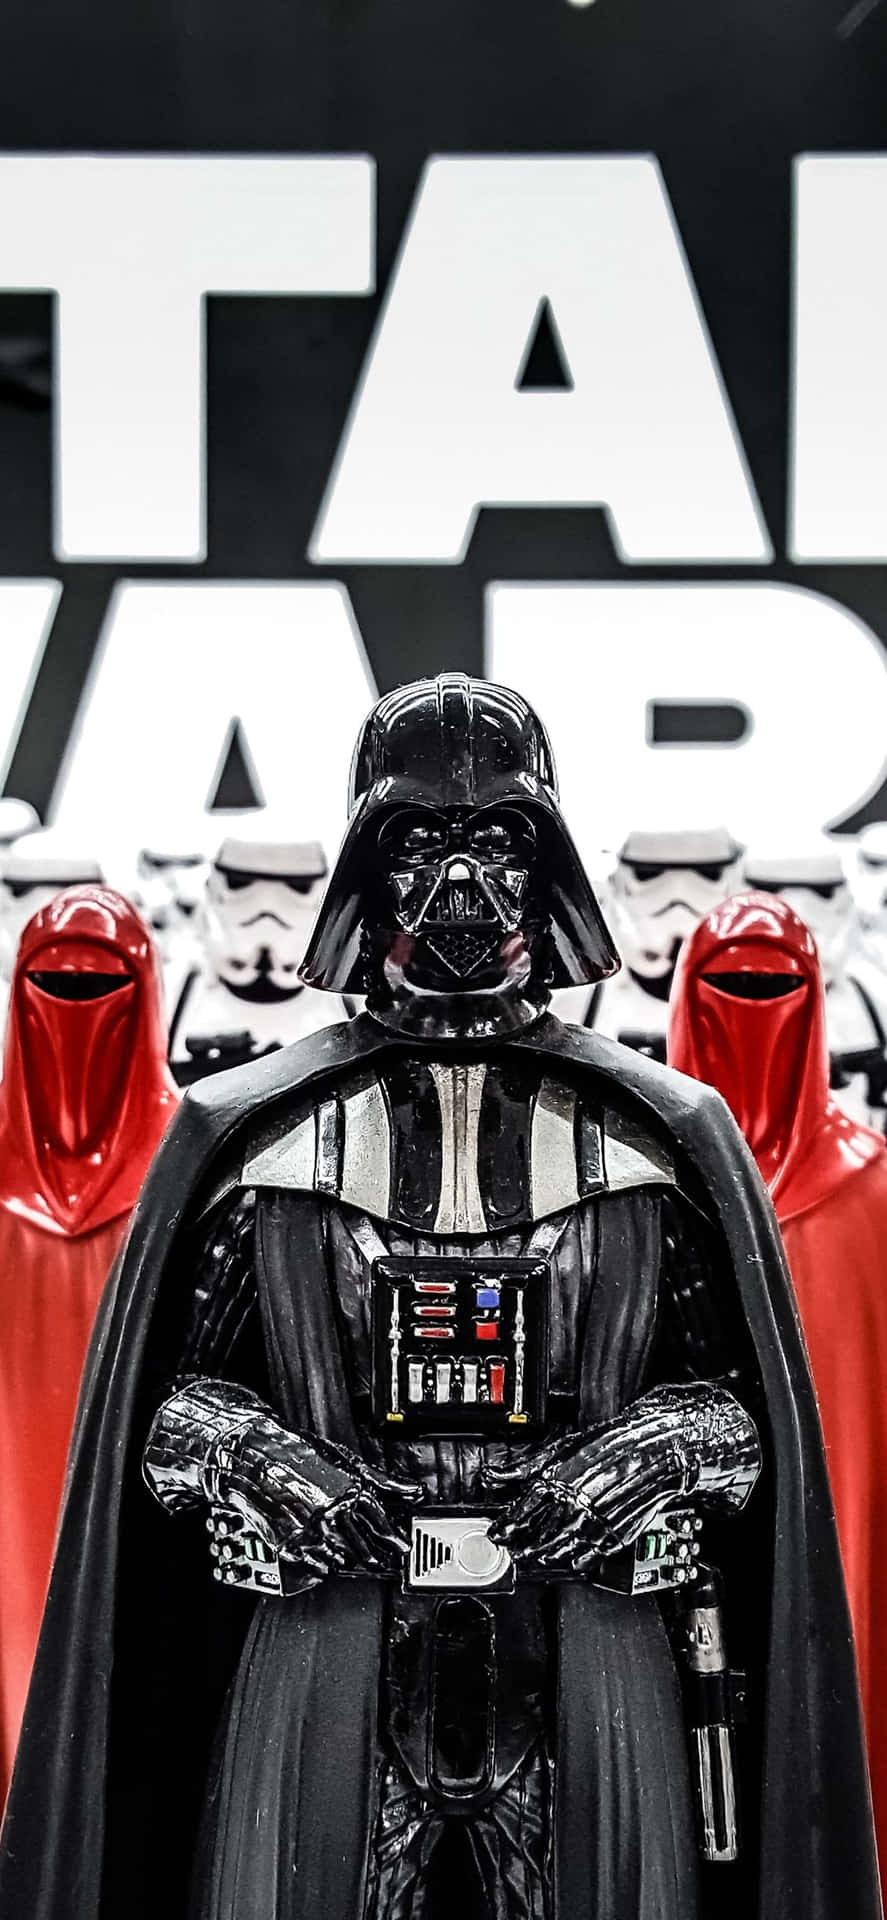 "Feel the power of the Dark Side with this Darth Vader themed iPhone". Wallpaper